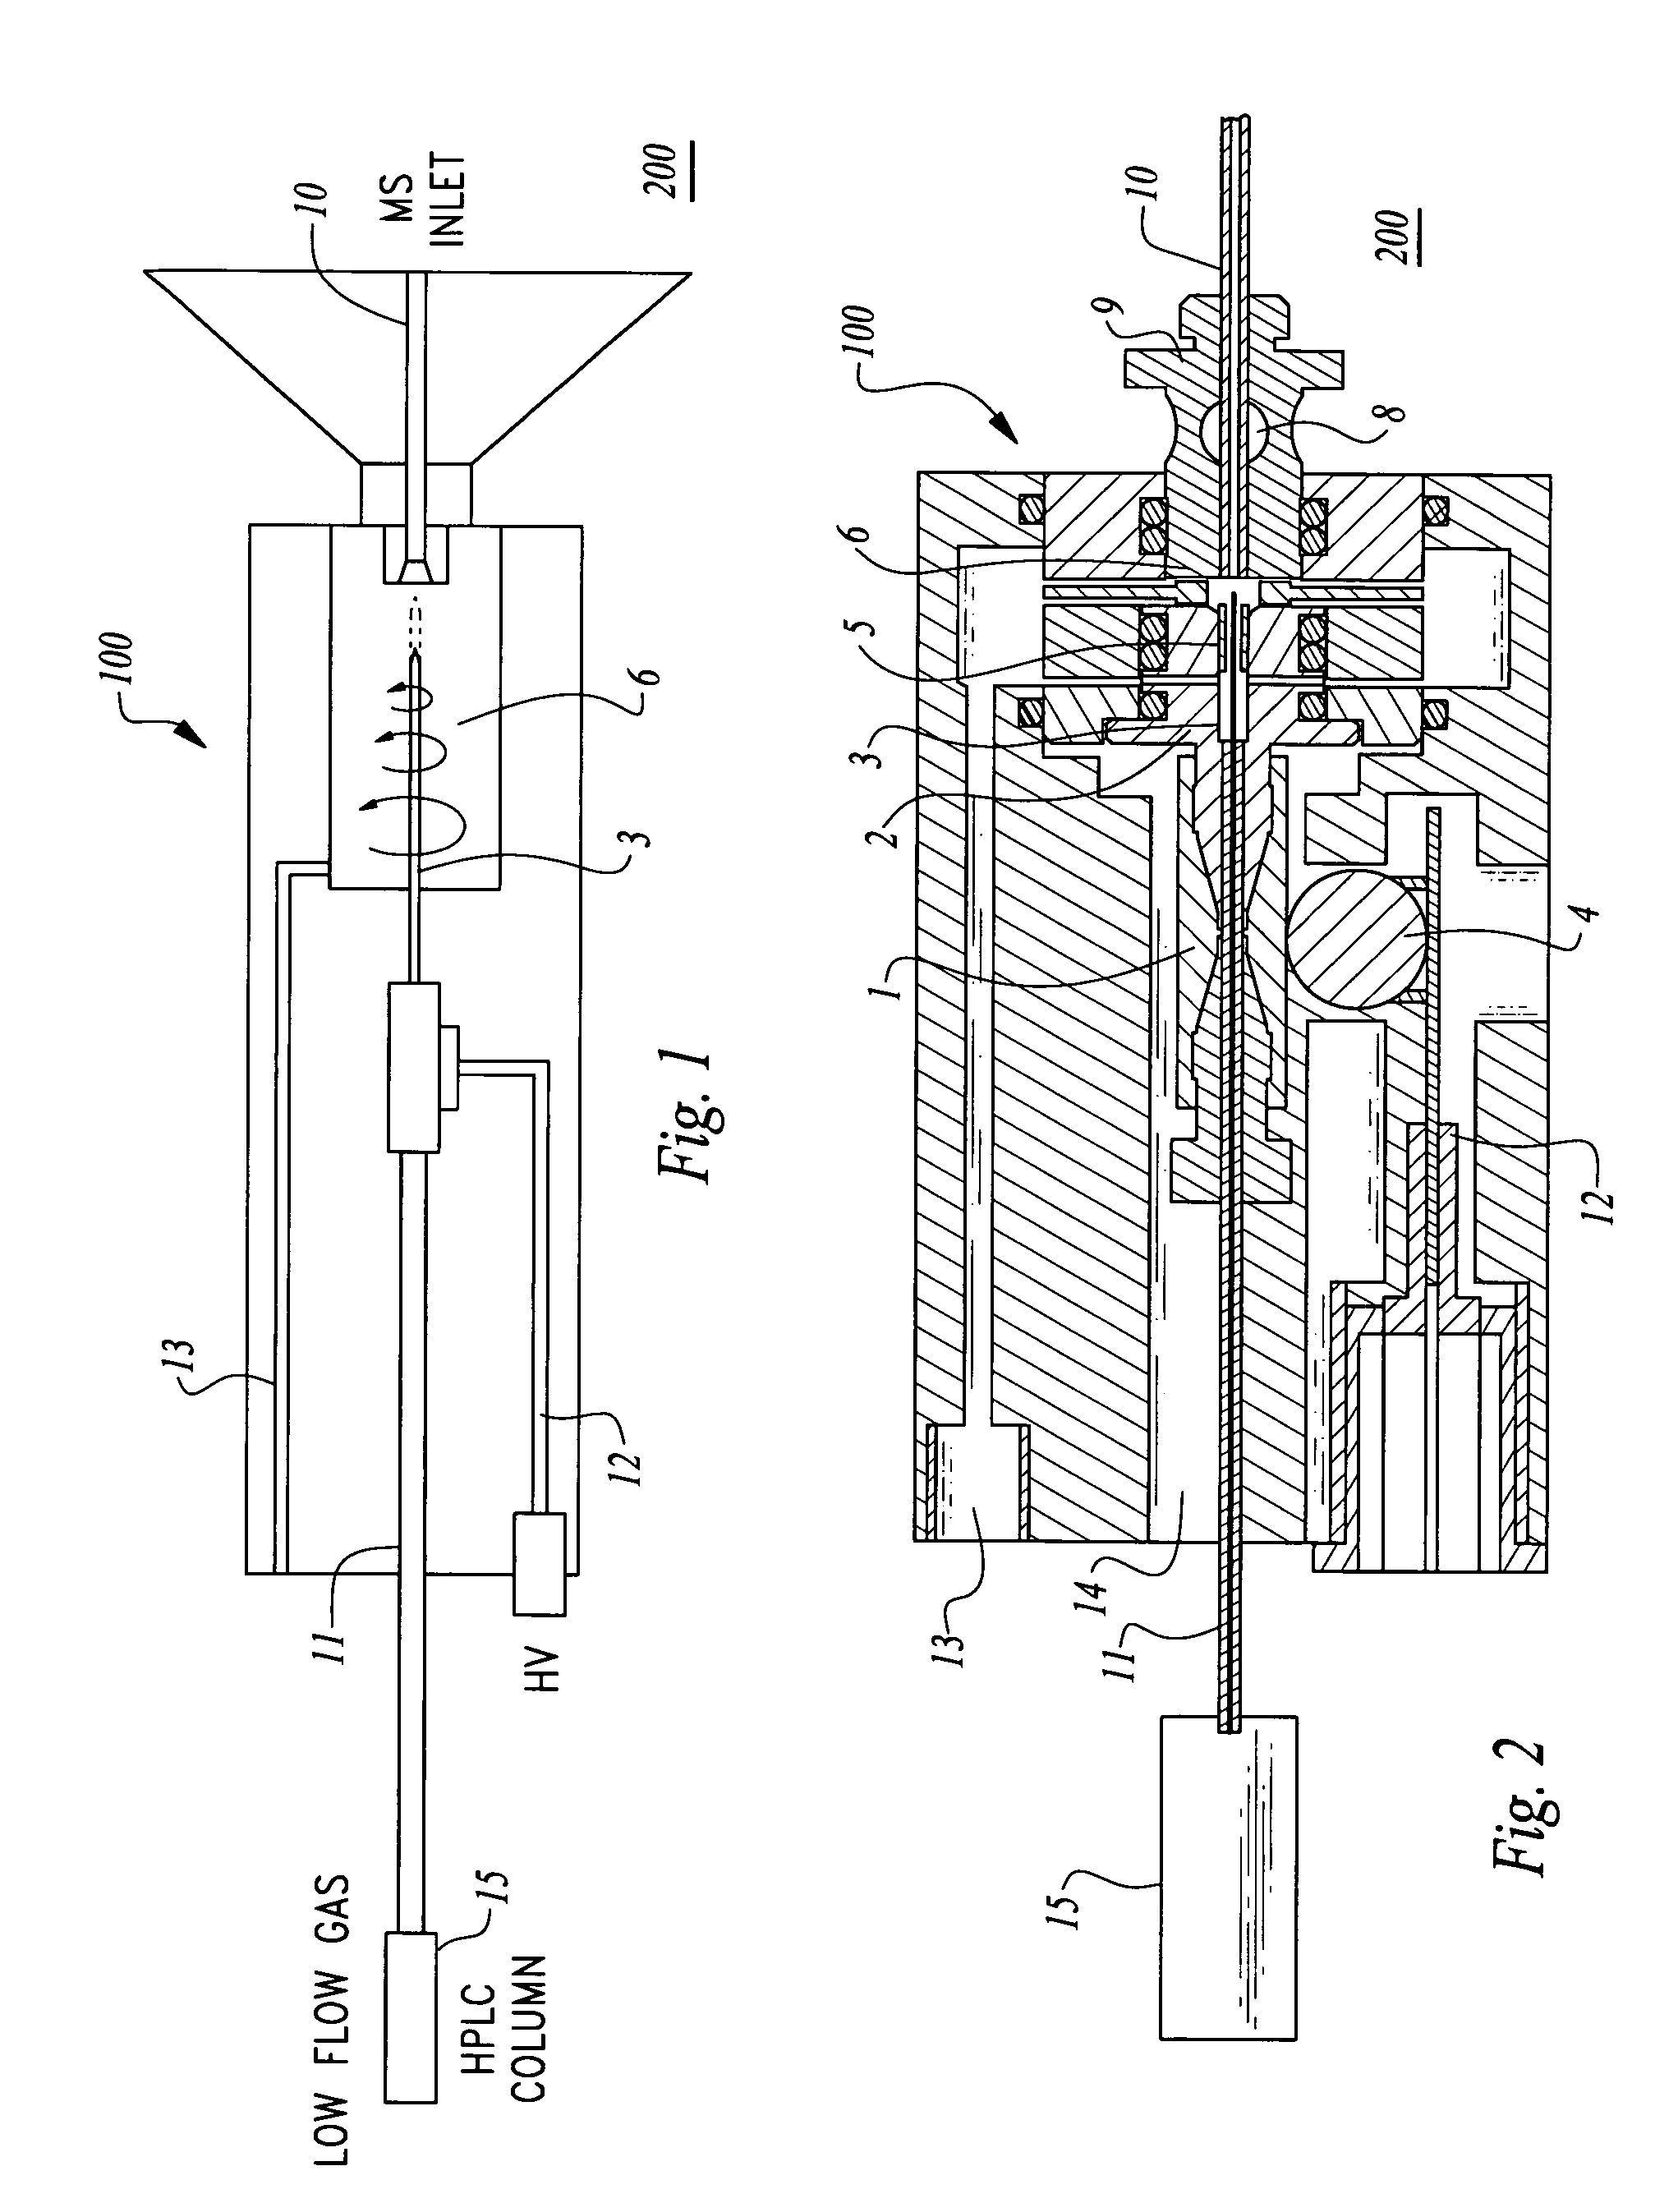 Method and apparatus for nano-capillary/micro electrospray for use in liquid chromatography-mass spectrometry